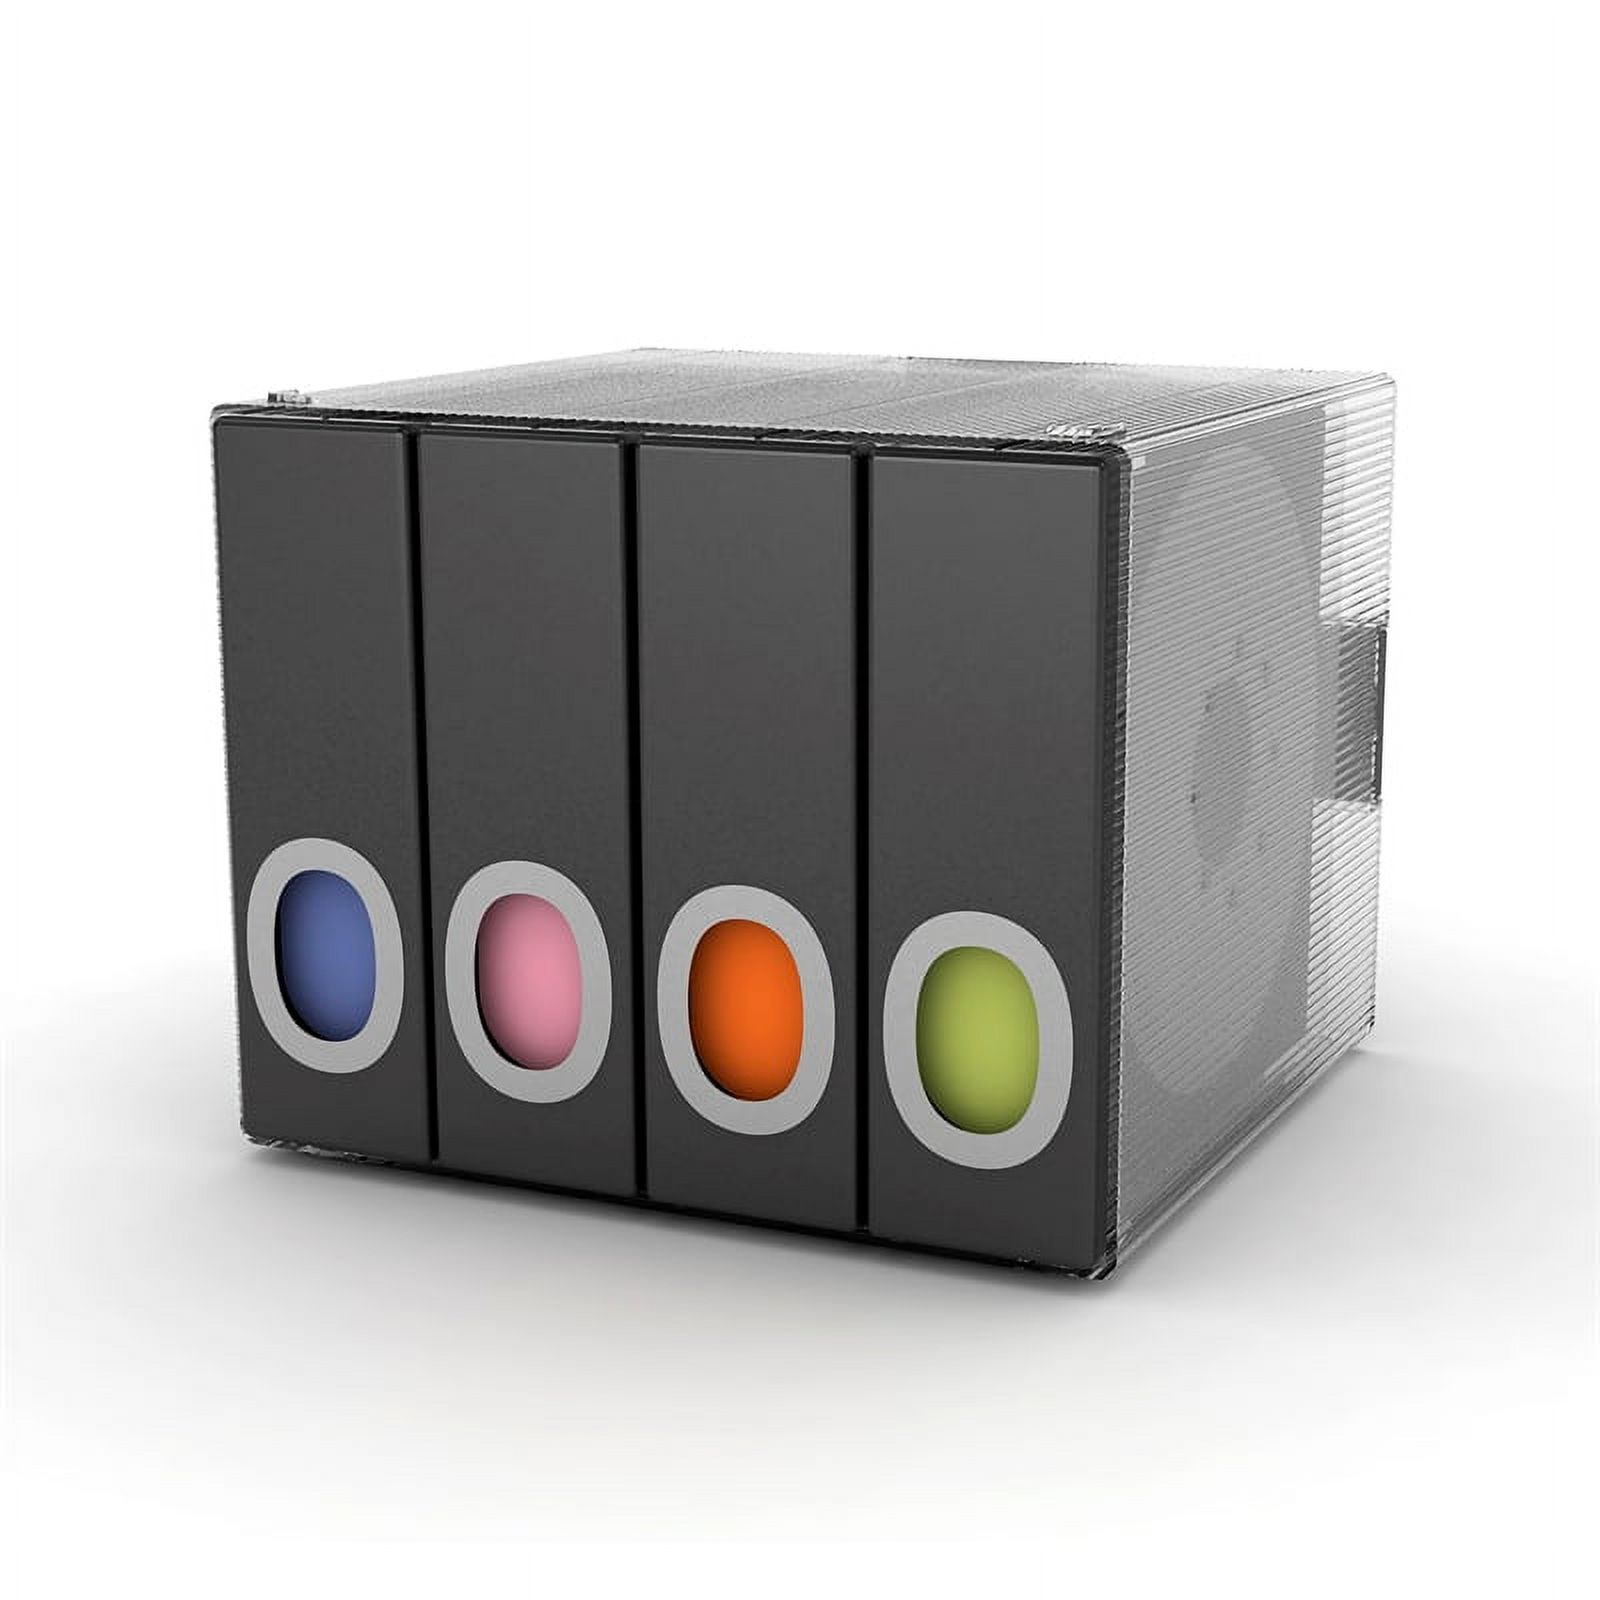 Atlantic Parade 96 Disc Holder w/ 4 Color-Coded Pull-Out Categories in Black - image 2 of 6